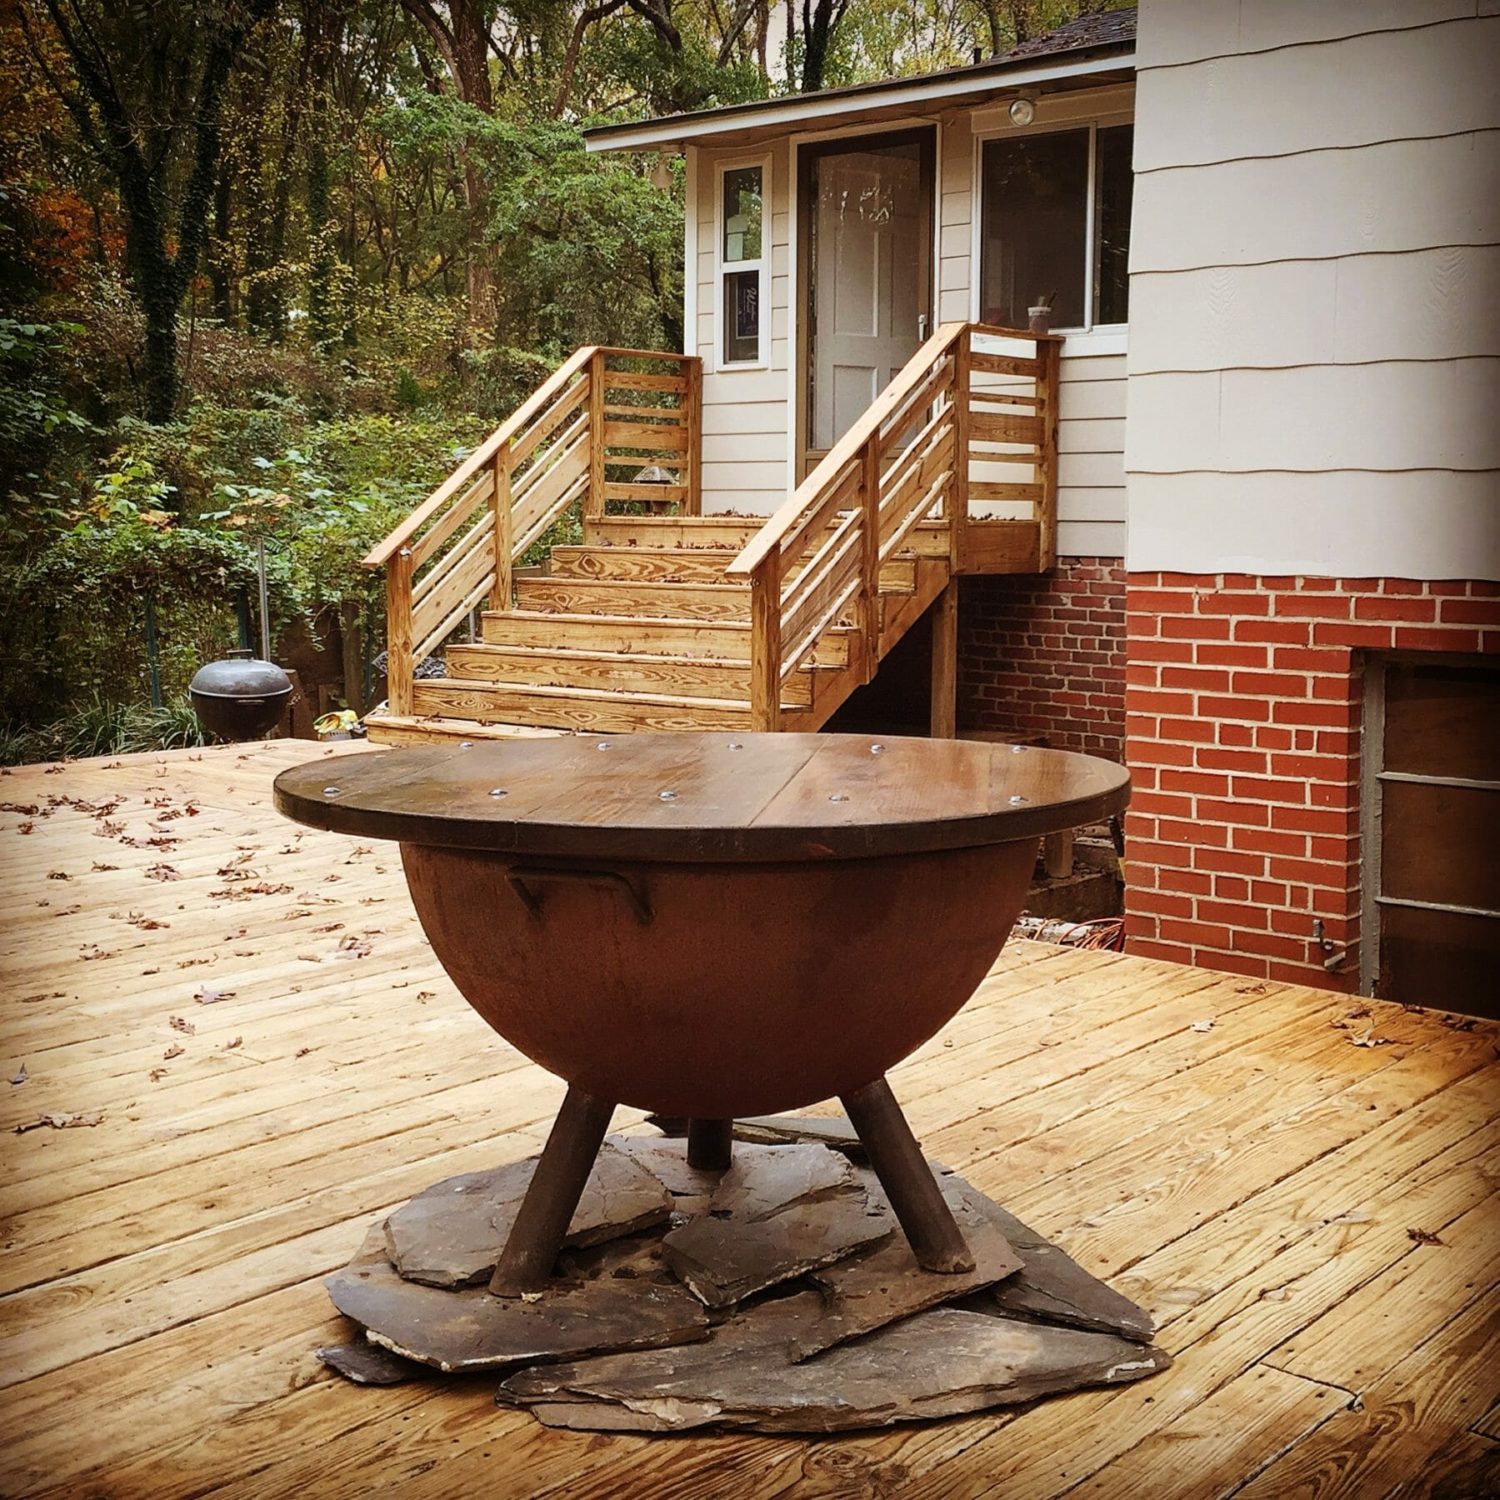 S Fire Pits Blog, Fire Pit Suitable For Decking